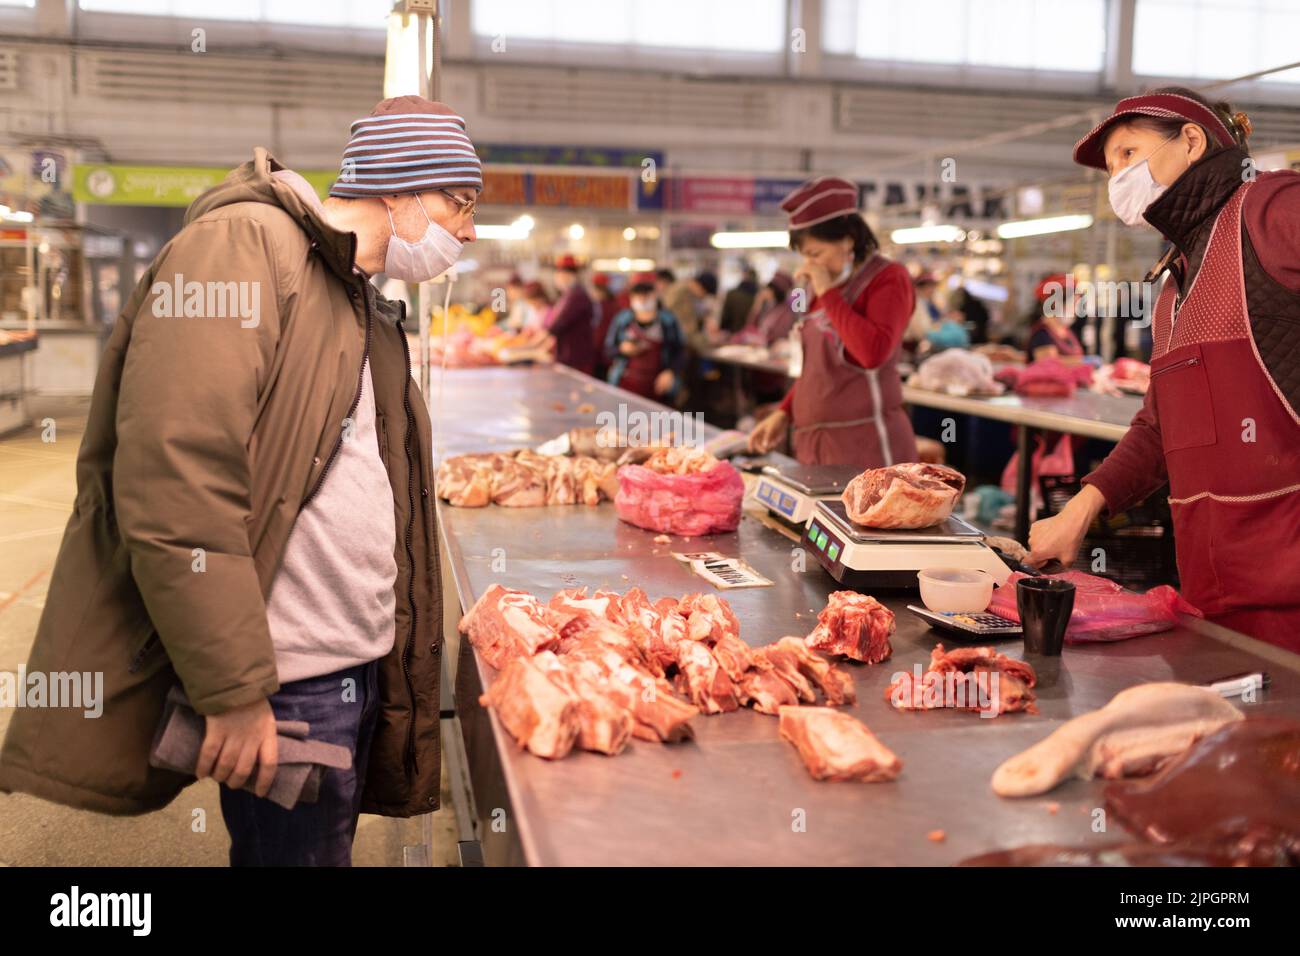 Adult man buying fresh meat at butchery market. Food shopping concept. Stock Photo